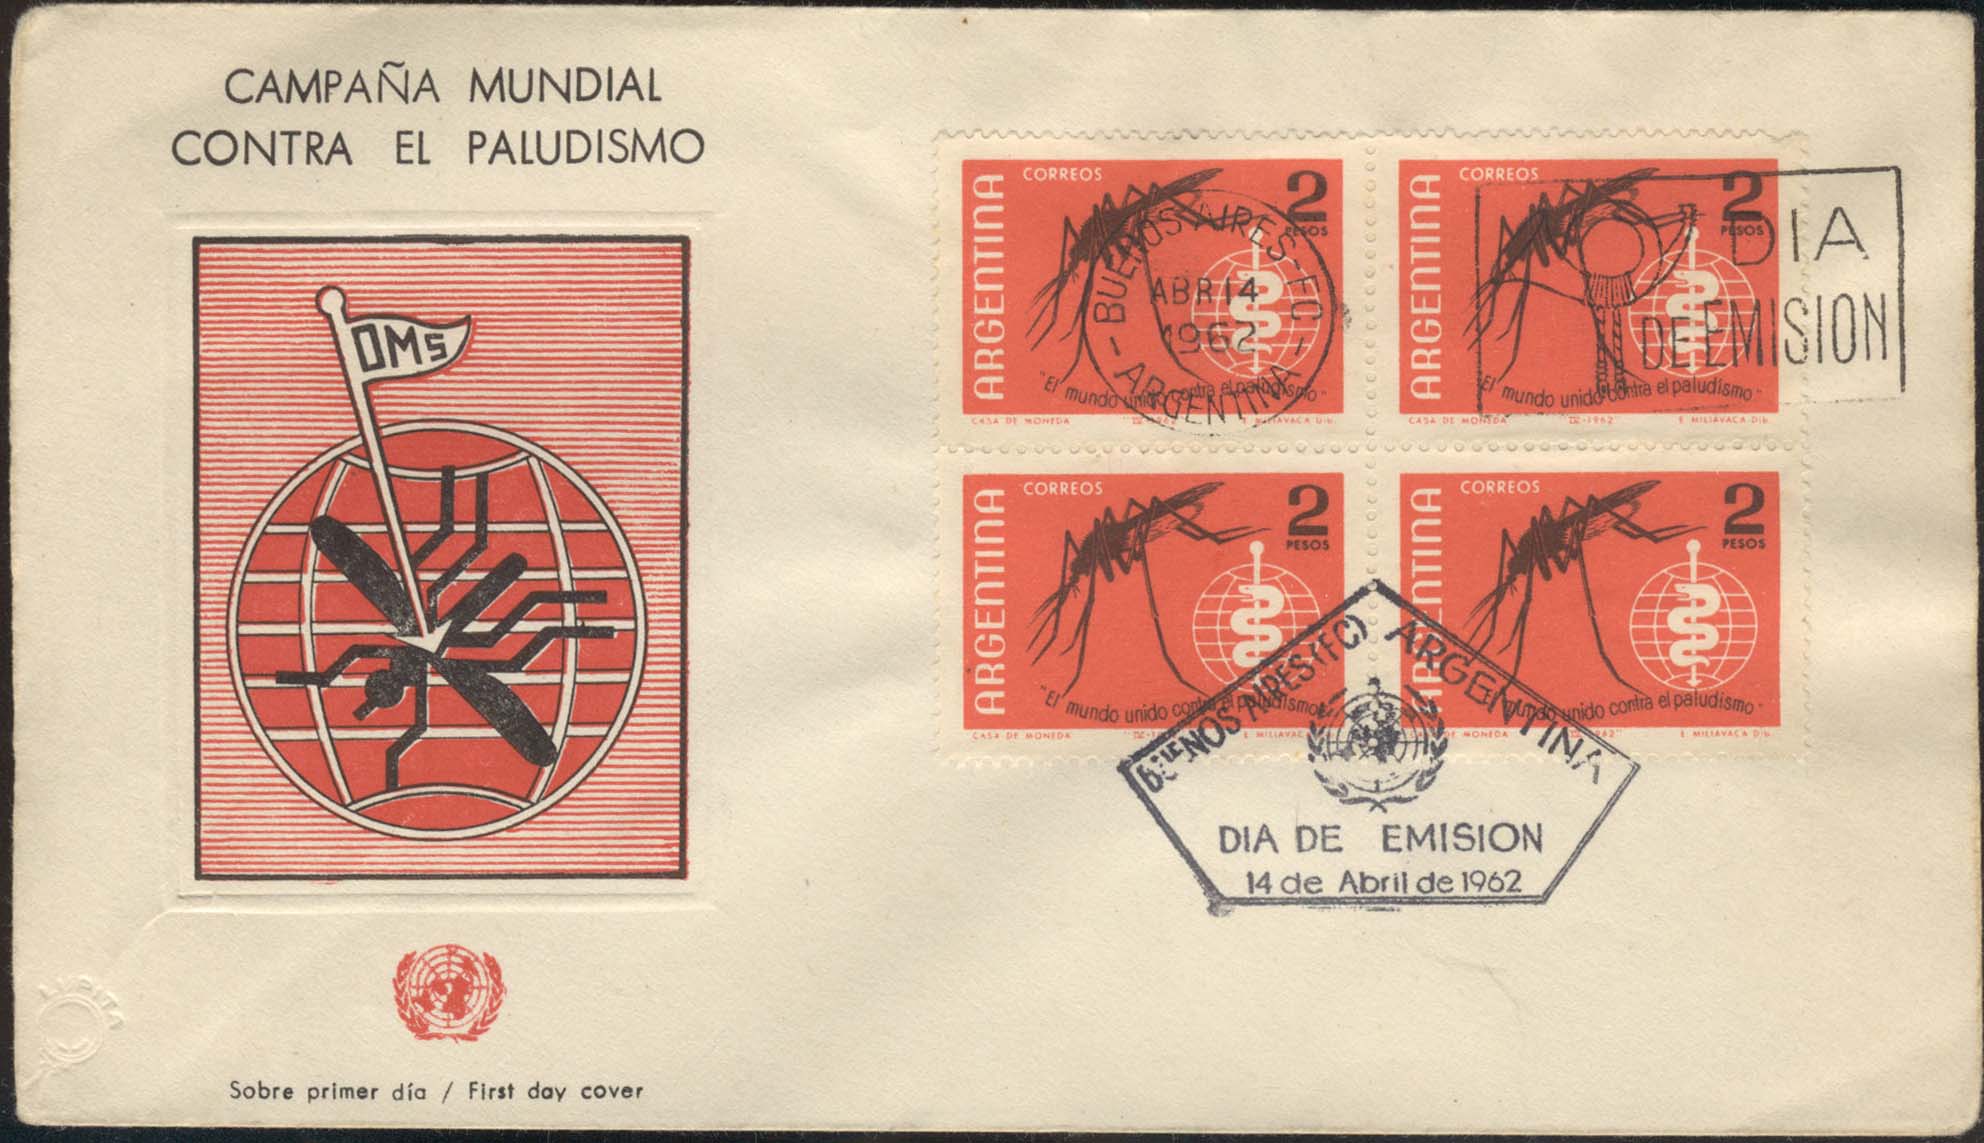 Scott%20737%20(Block%20of%204)%20(FDC%20w/%20Mosquito/Flag%20(Red/Black)%3Cbr%3E(Buenos%20Aries%20Cancellation)%20(Buenos%20Aries%20-%20Horn%20Cancellation))